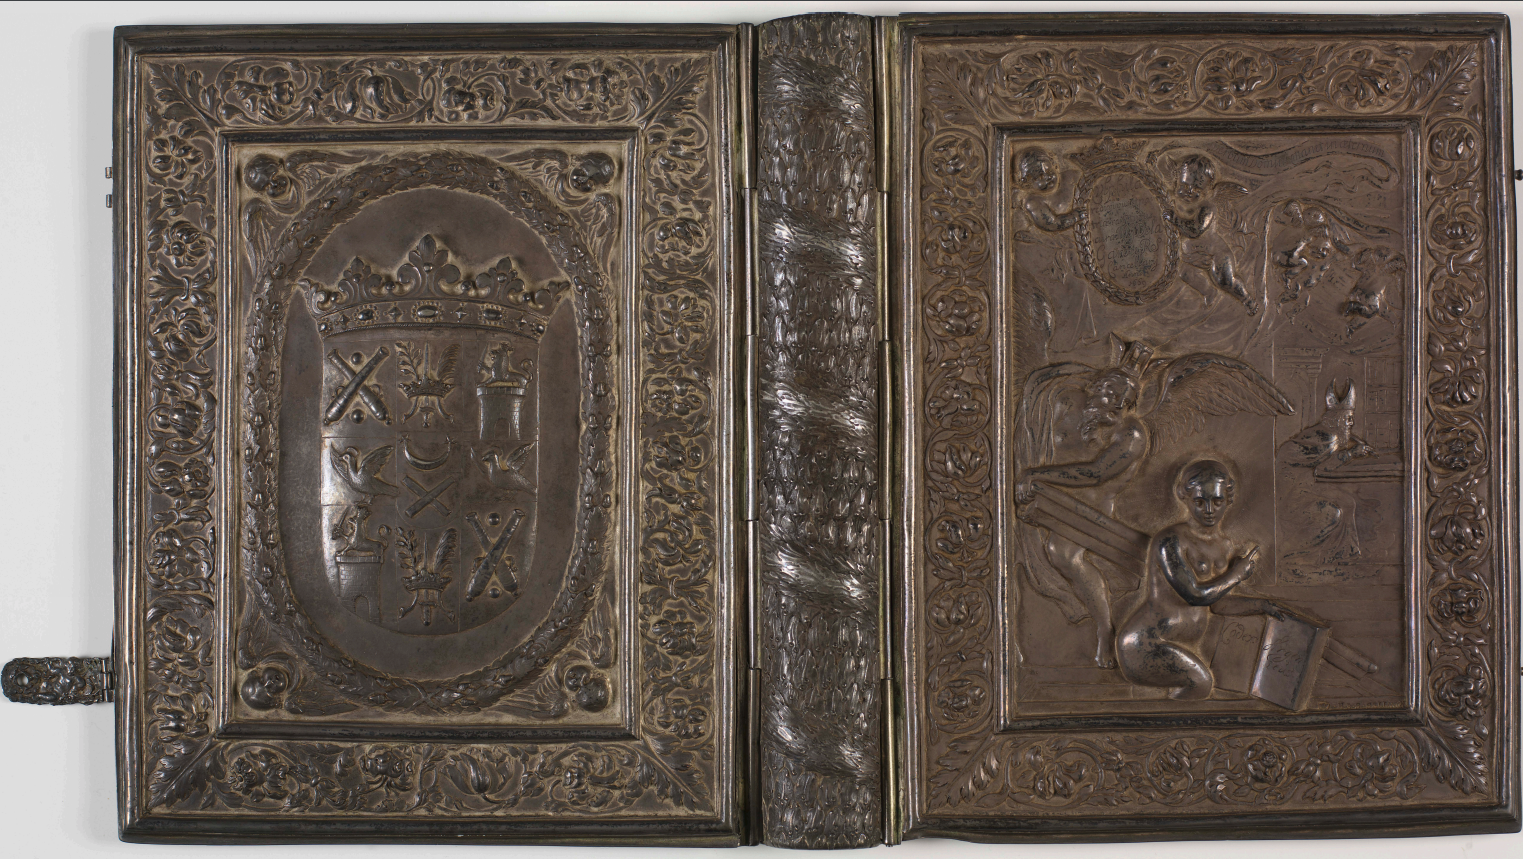 17th century chased silver binding commissioned for the codex by Count Magnus Gabriel De la Gardie before he presented the codex to the University of Uppsala.